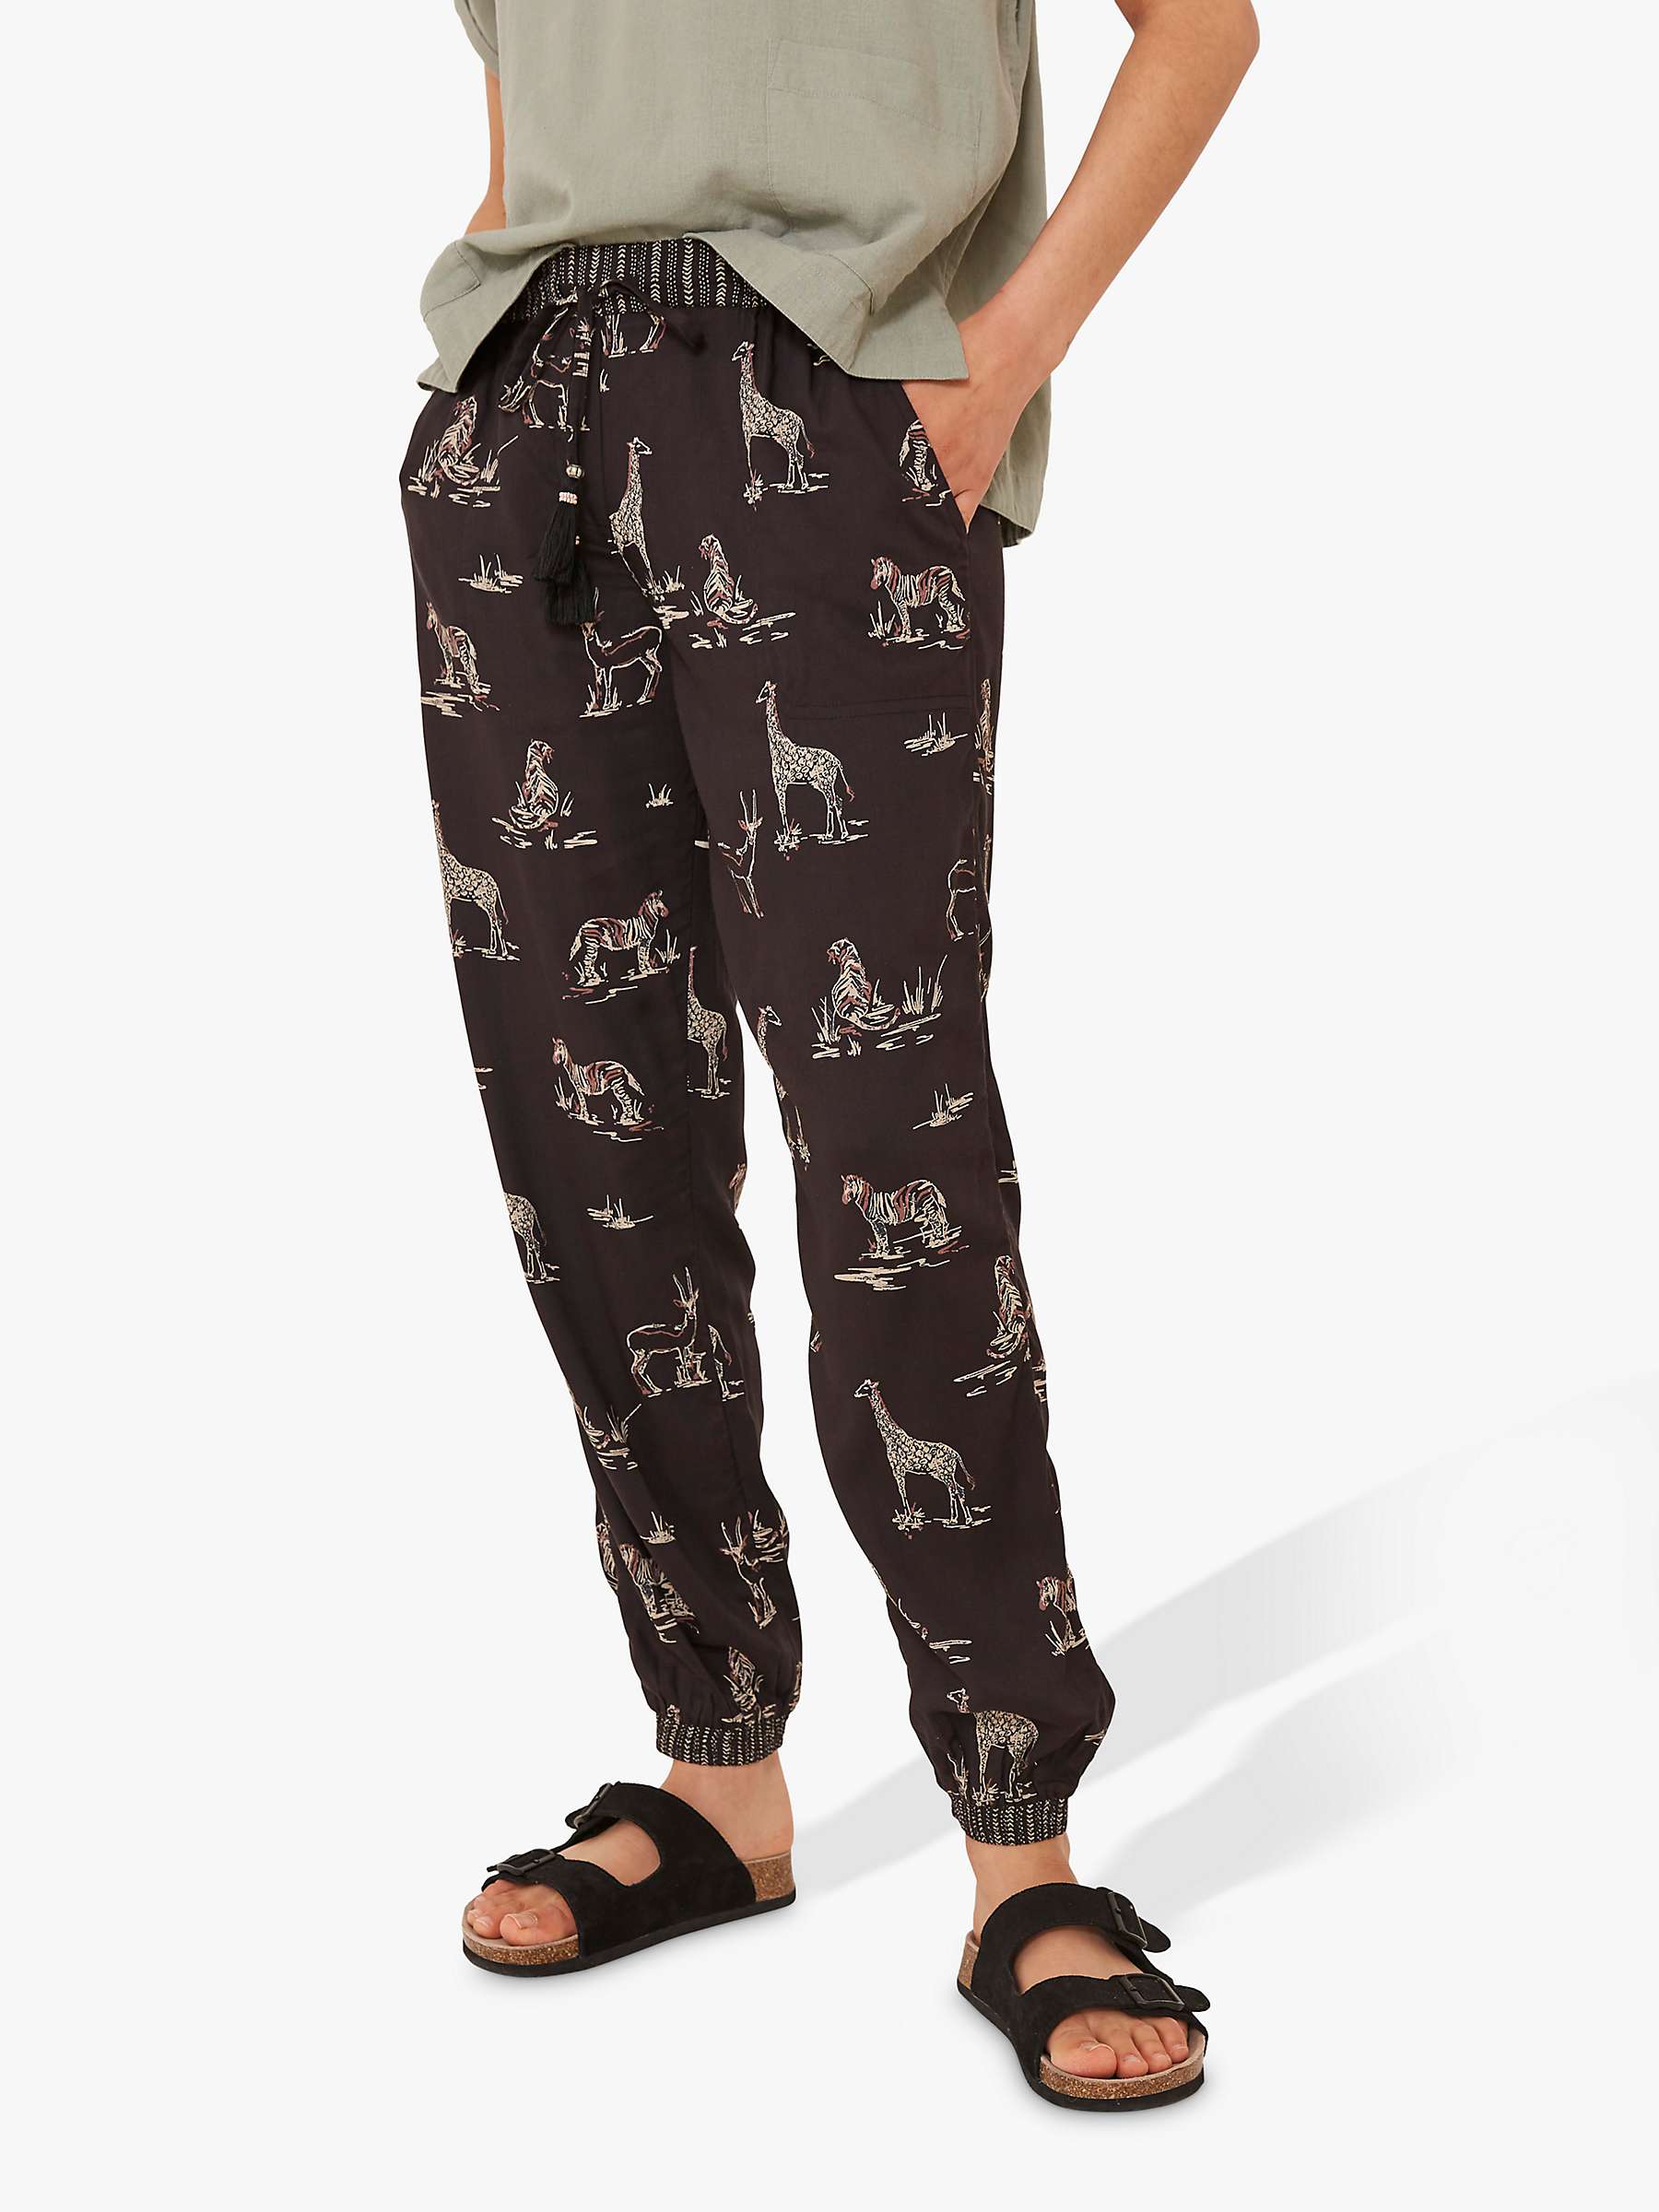 Buy FatFace Lyme Safari Print Trousers, Washed Black Online at johnlewis.com